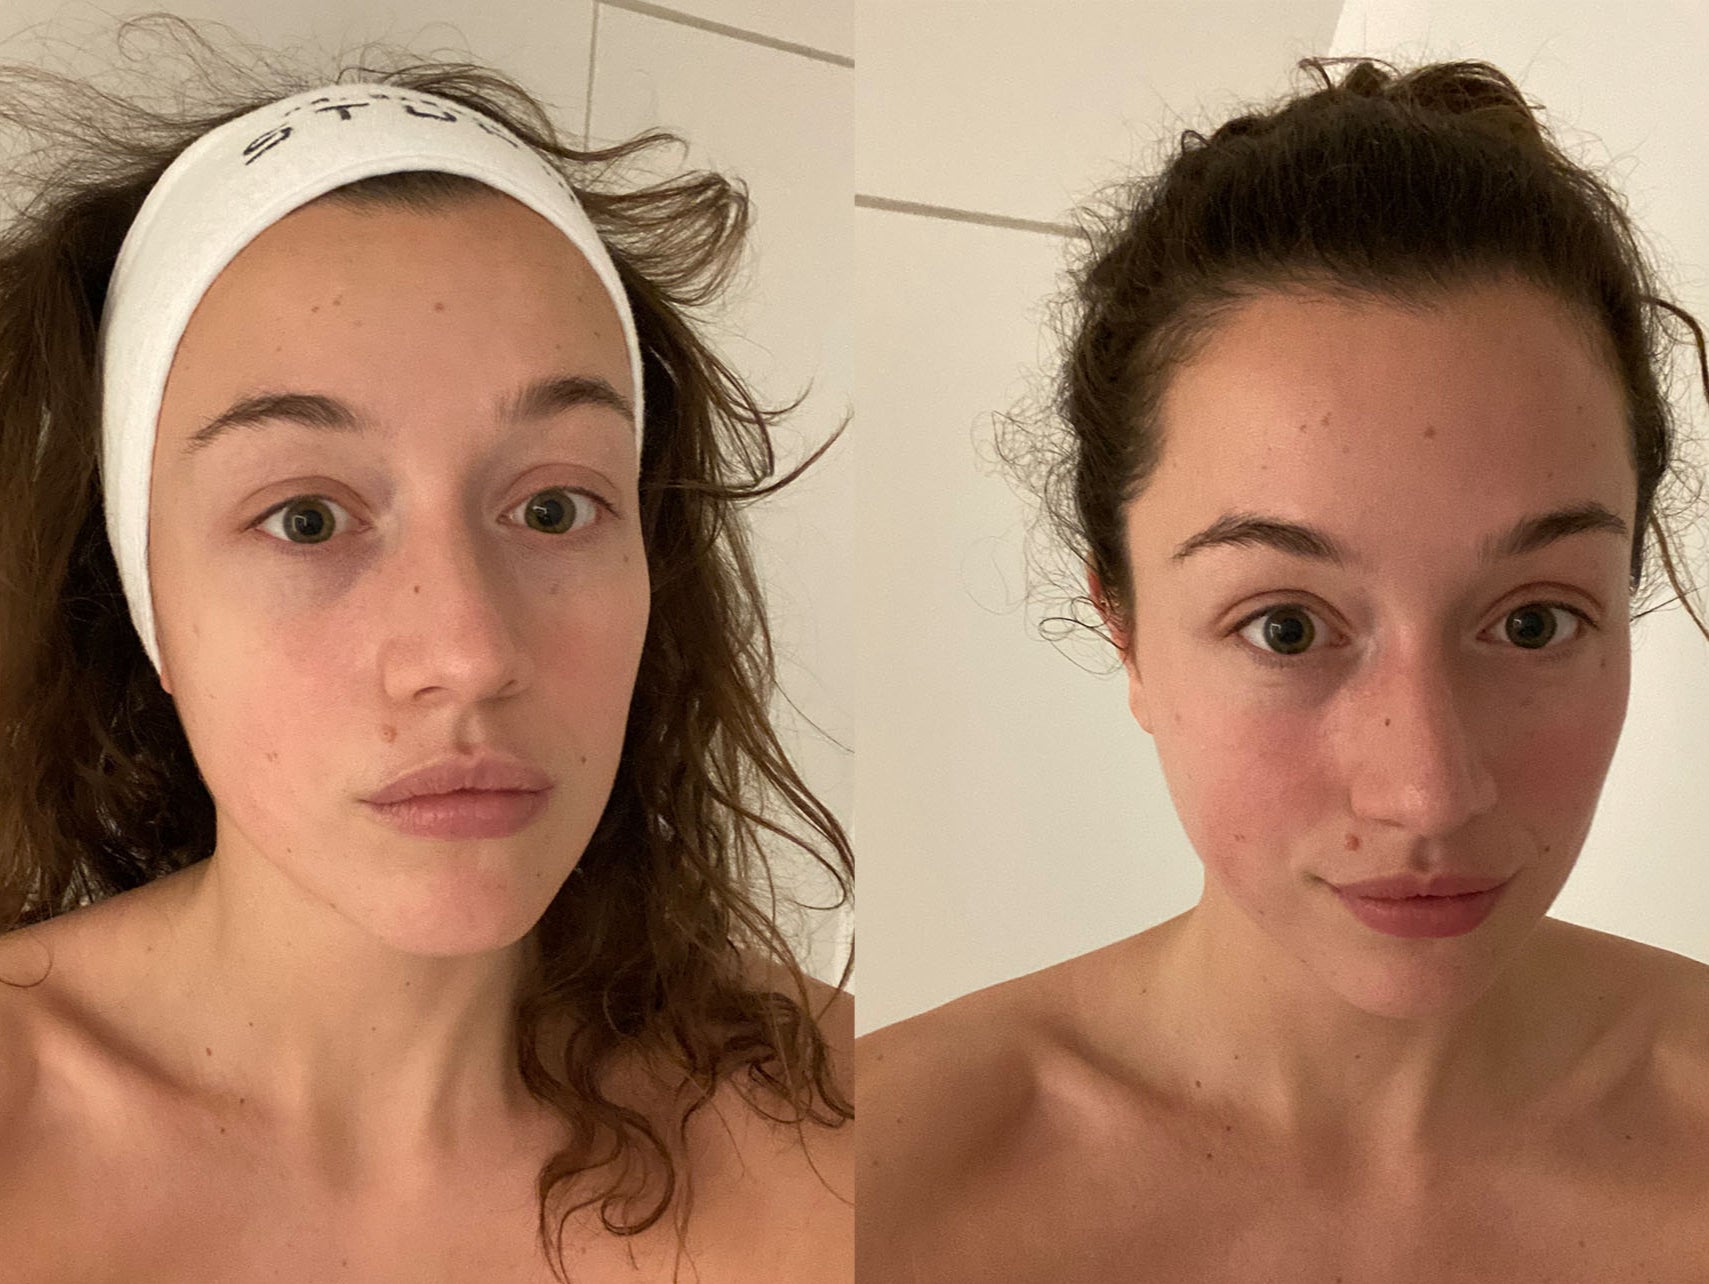 Before (left) and after (right) the treatment